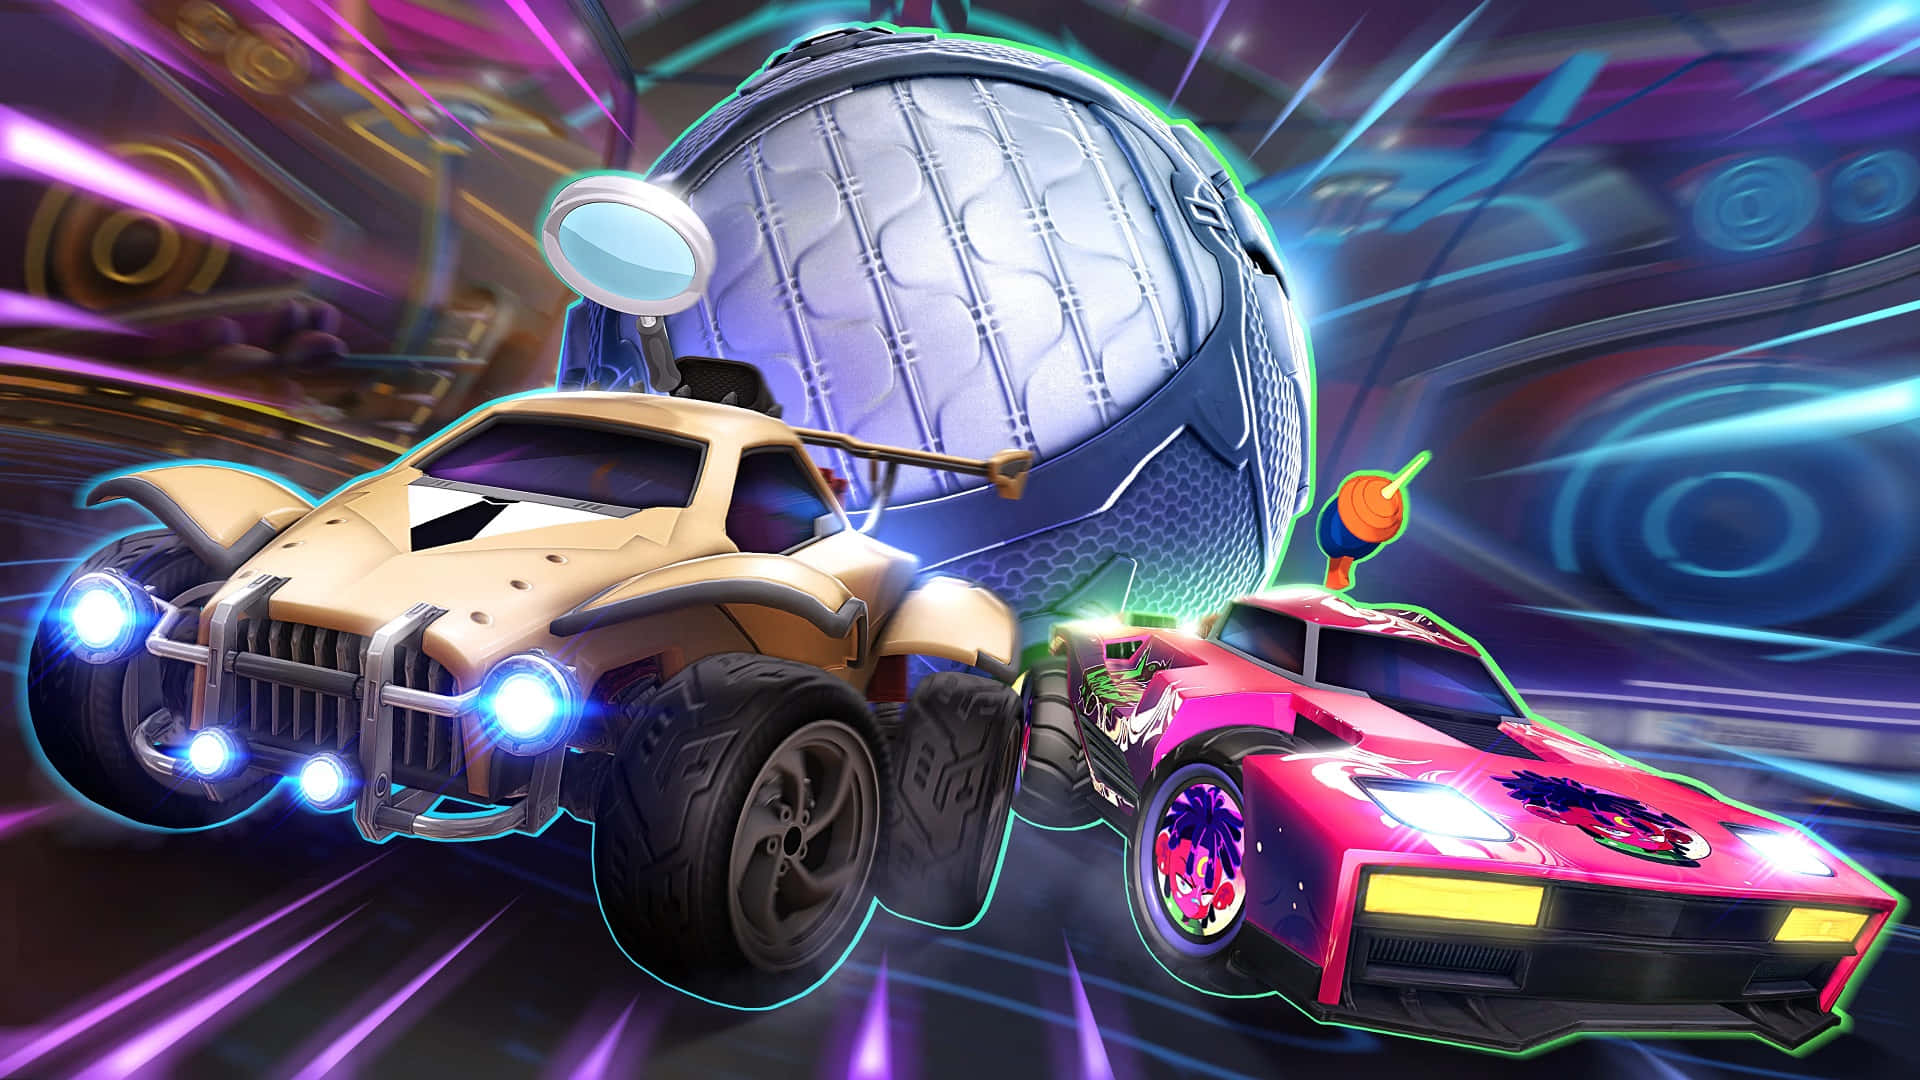 “Ride the rocket - take your game to the next level with Rocket League!”